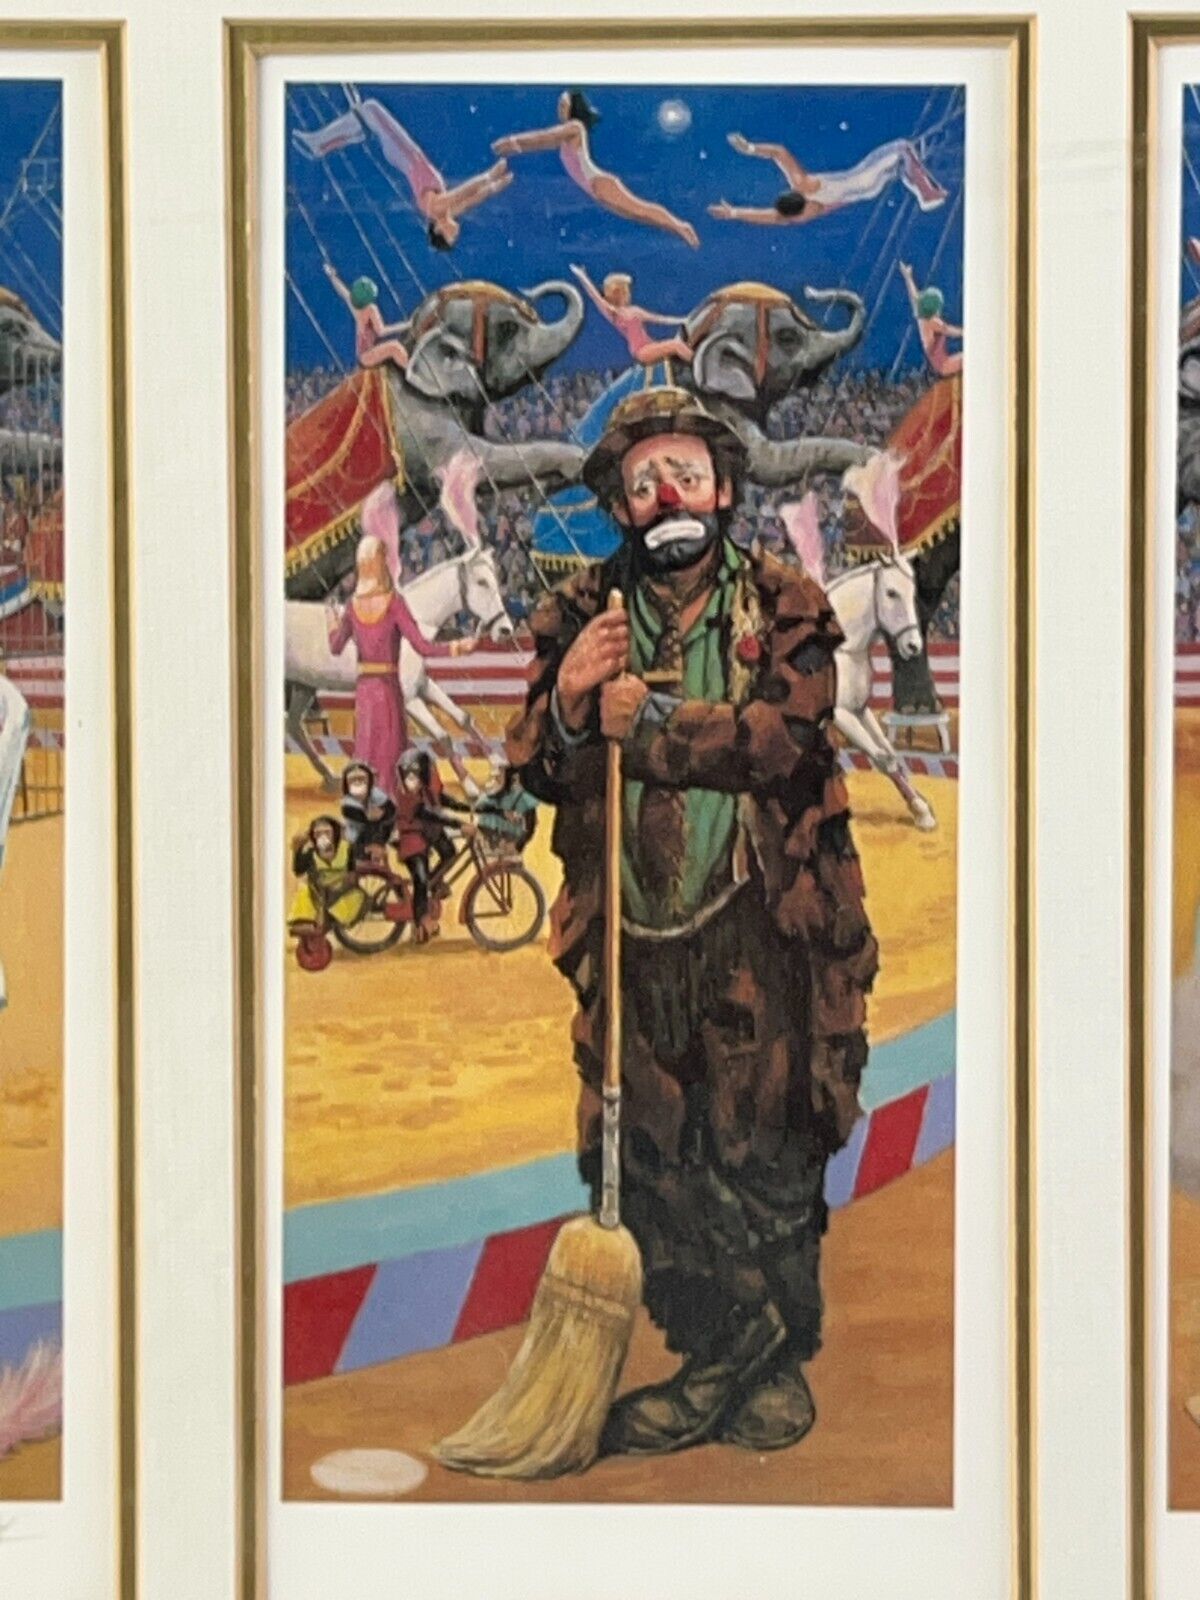 Emmett Kelly in the spotlight Commemorative Signed Edition Tryptich 21x24in 8329